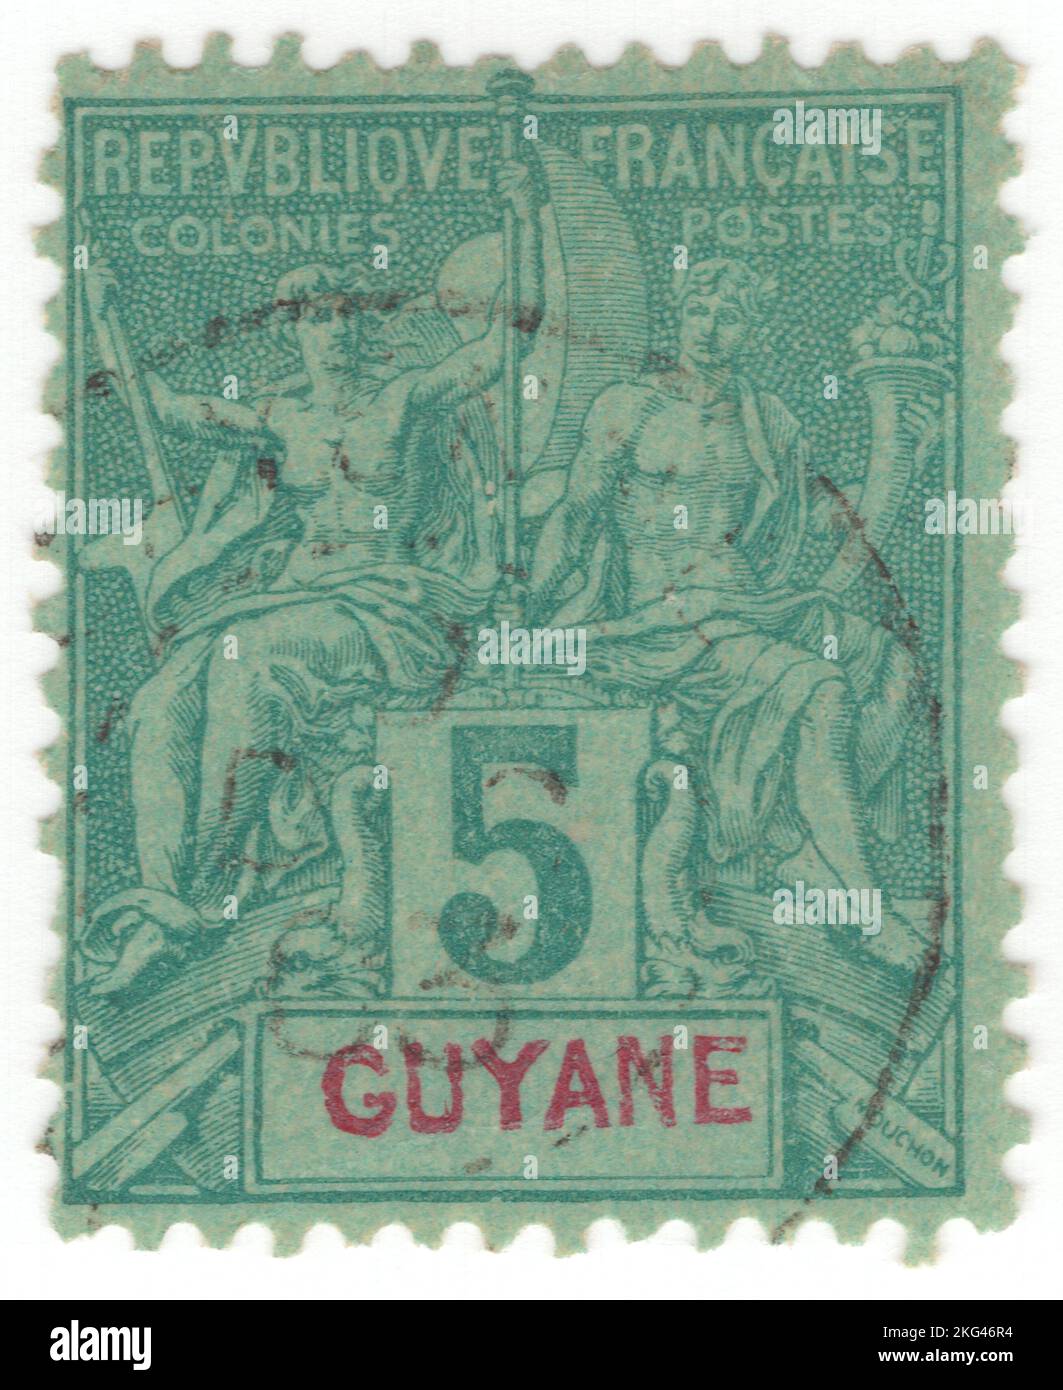 FRENCH GUIANA - 1892: An 5 centimes green on greenish postage stamp depicting Couple of ancient God and Goddess as allegory Navigation and Commerce. Name of Colony in Blue or Carmine, 'Tablet' key-type inscribed 'GUYANE'. Allegory 'Navigation and Commerce' was designed by Louis-Eugene Mouchon. The Navigation and Commerce issue is a series of key type stamps issued for the colonial territories of France Stock Photo